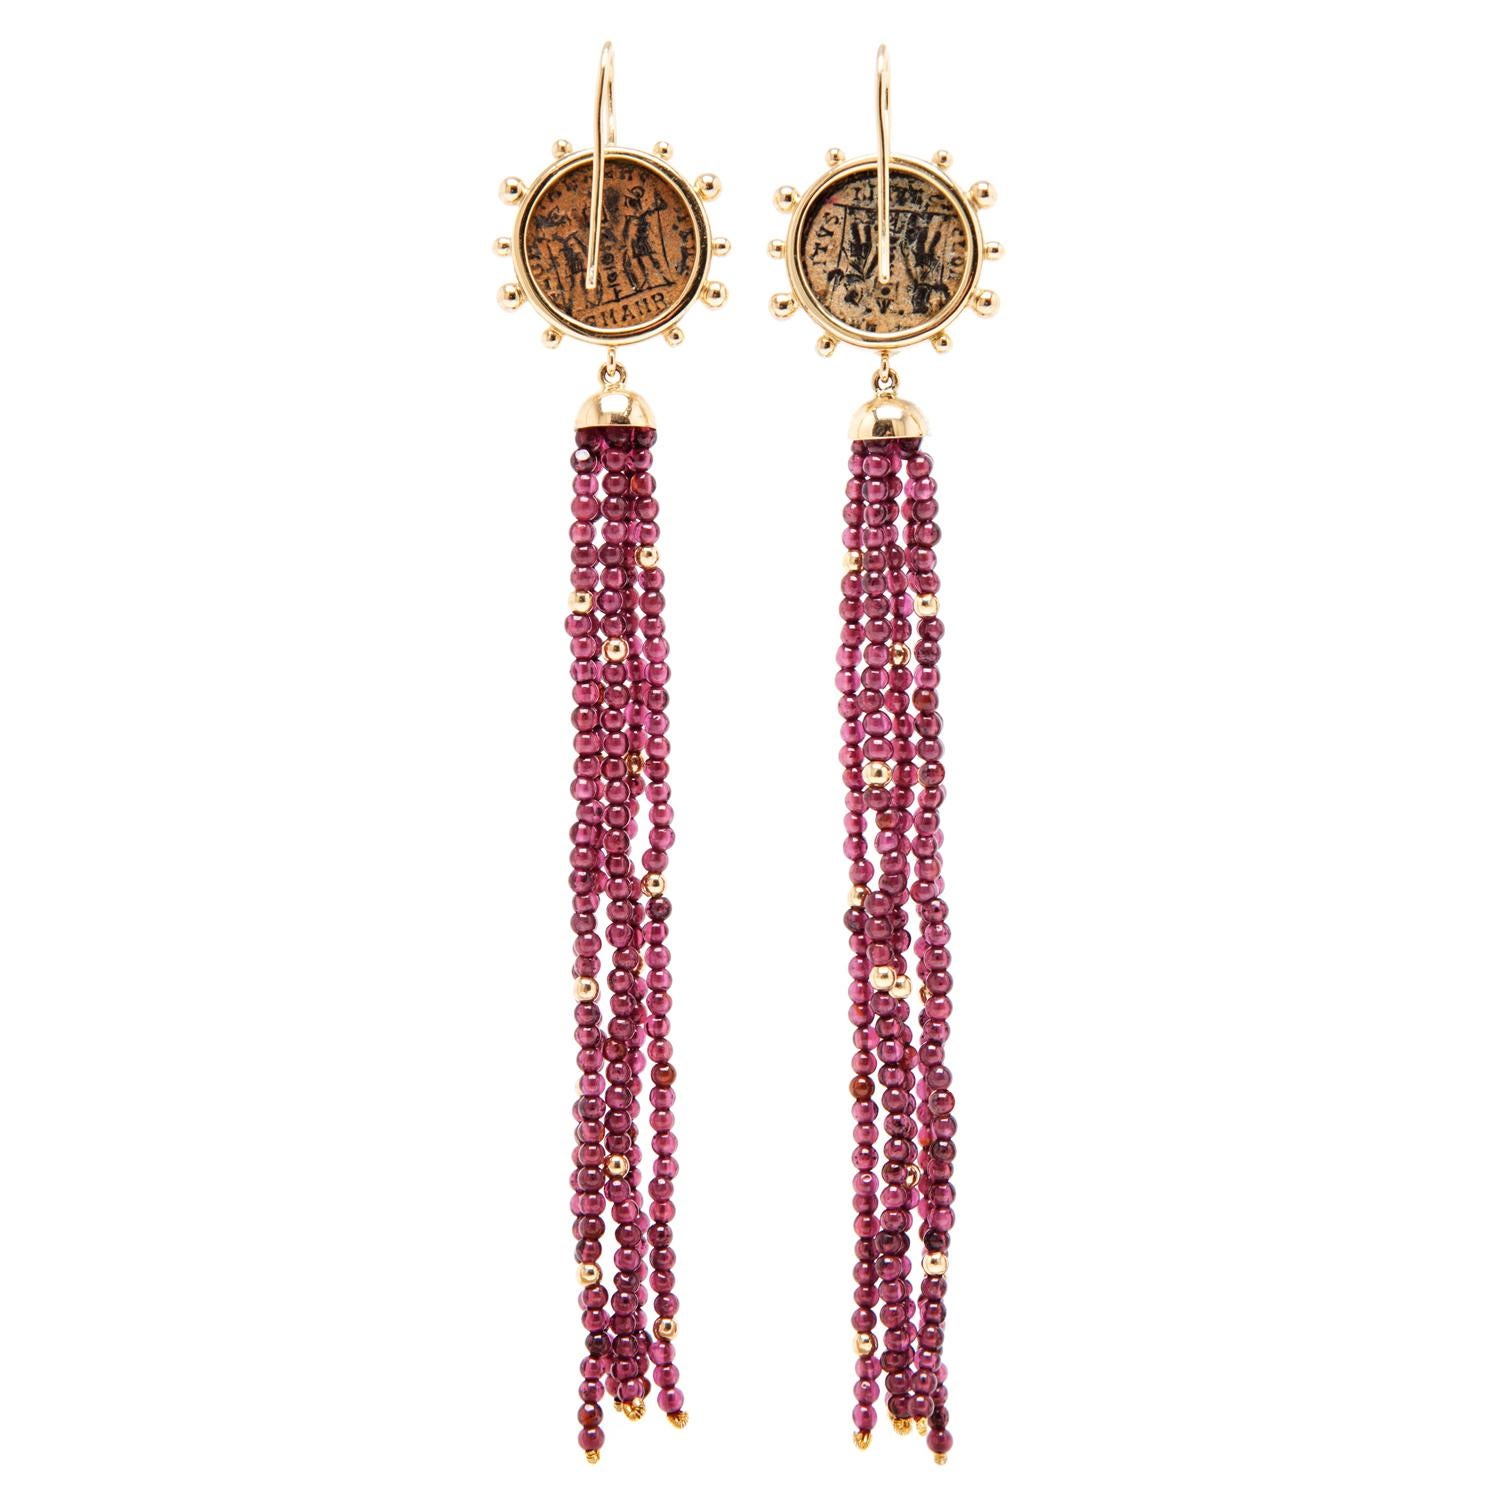 These Dubini coin earrings from the 'Empires' collection feature authentic Roman Imperial bronze coins set in 18K yellow gold with garnet and gold beaded tassel.

* Due to the unique process of hand carving coins in ancient times, there may be a few